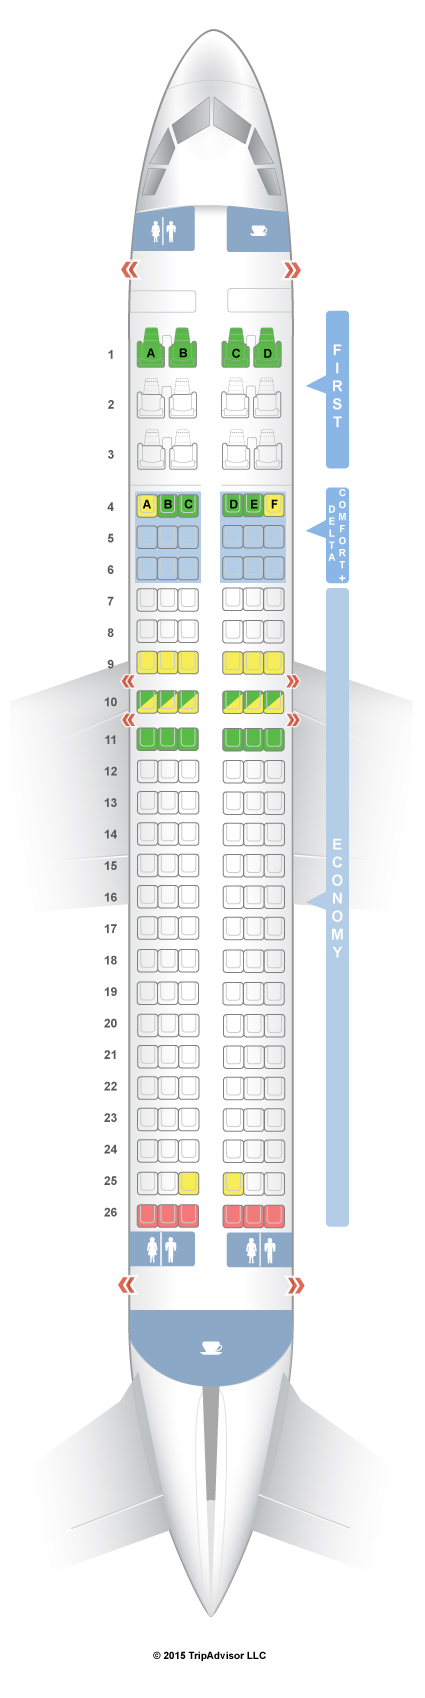 Delta Md 90 Seat Map Image Gallery Md 90 Seating Delta Md 90